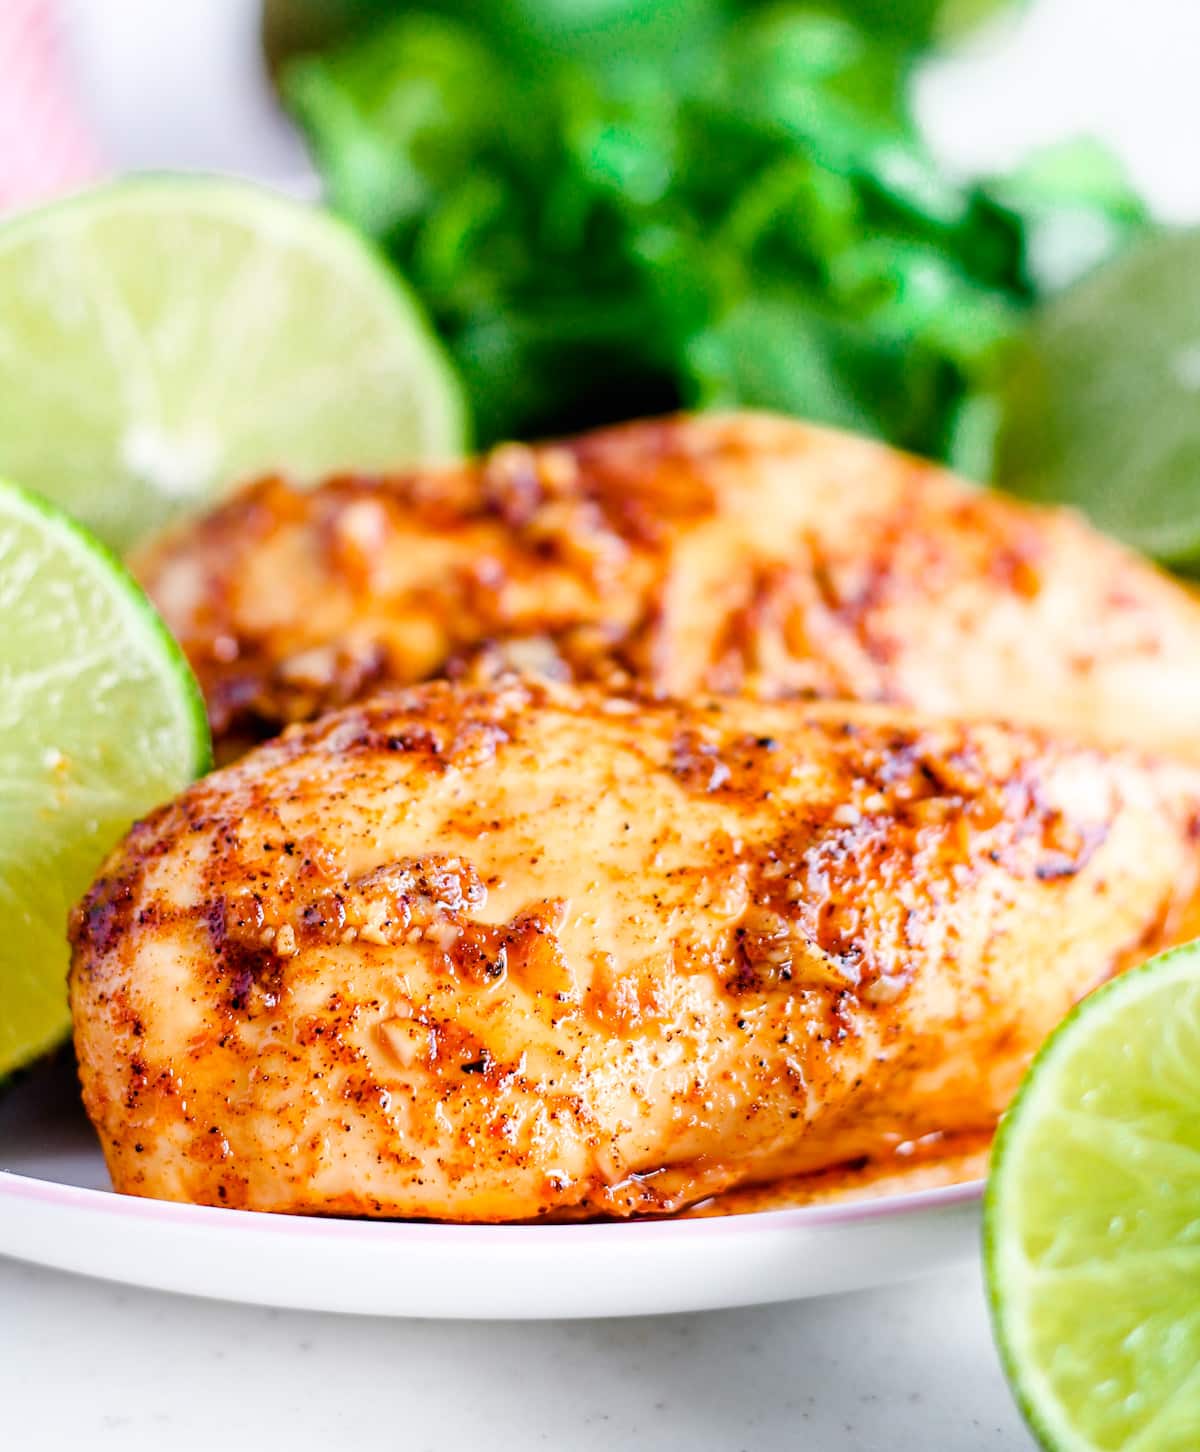 A plate of chili lime chicken marinade.